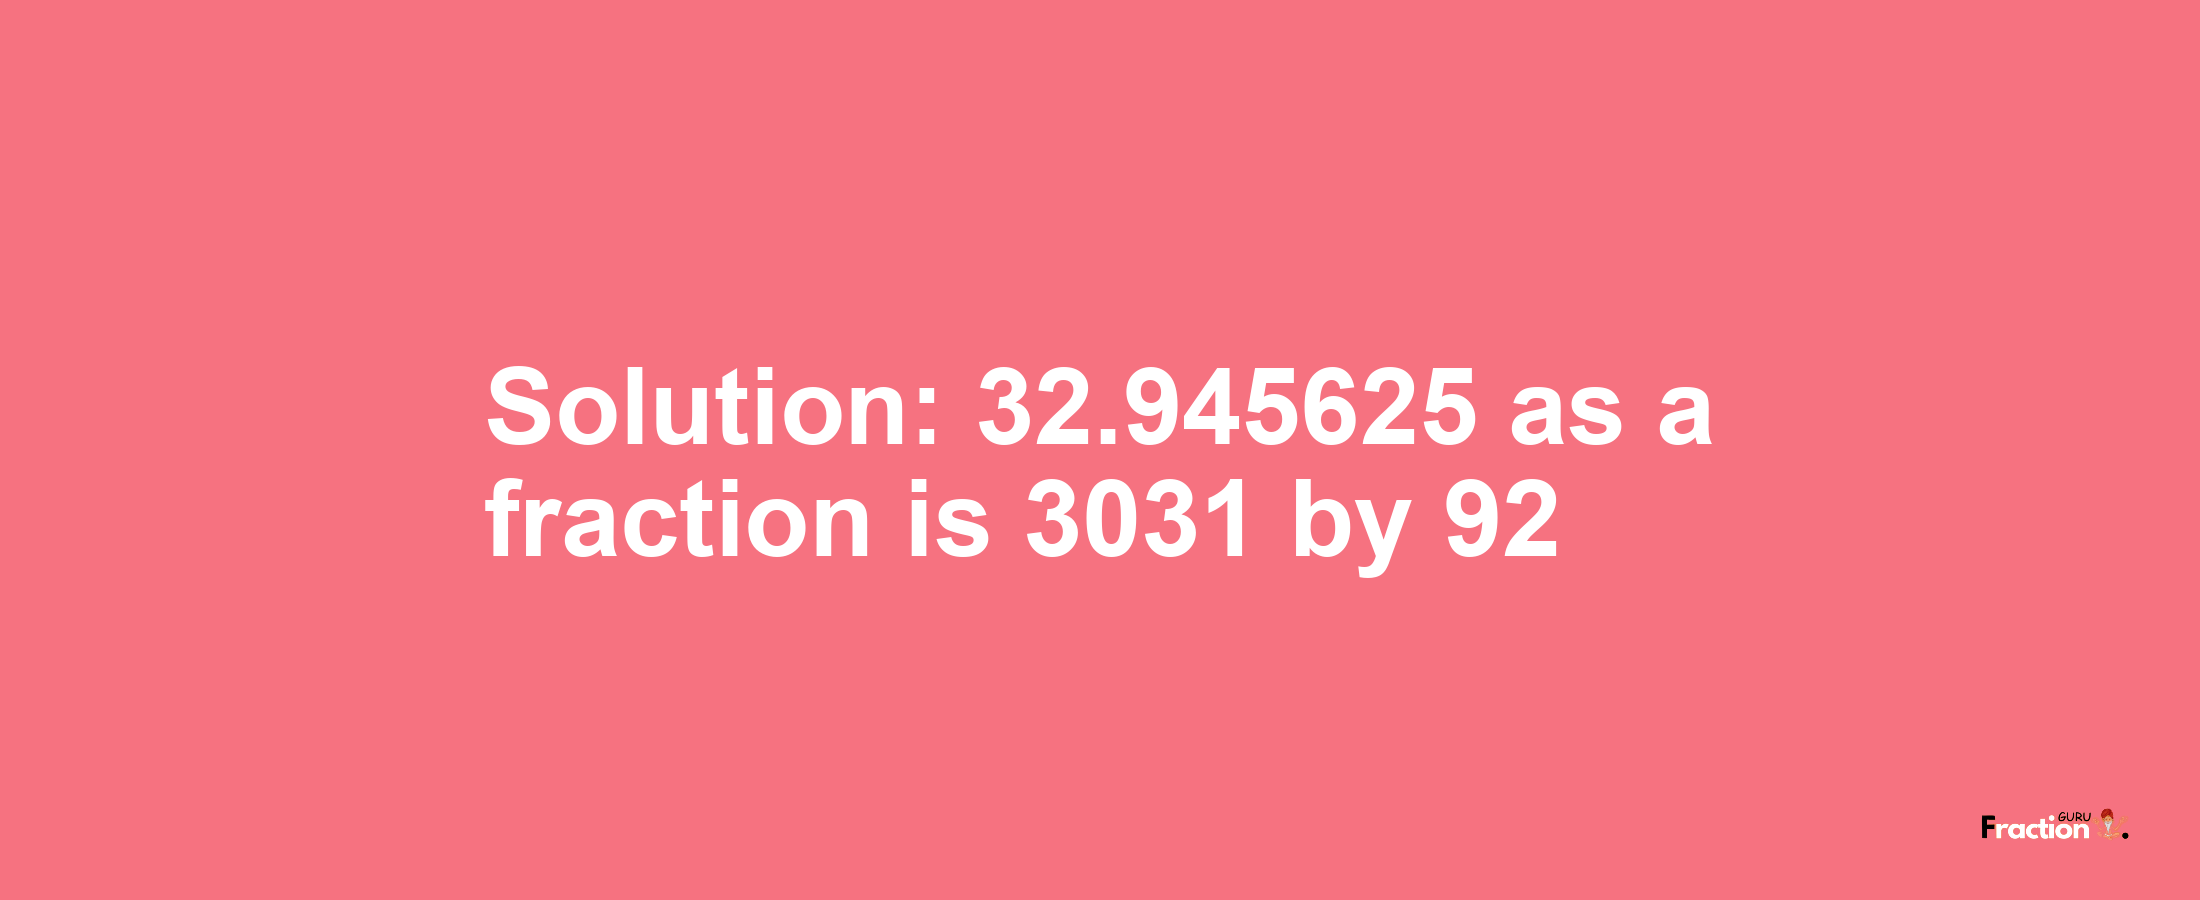 Solution:32.945625 as a fraction is 3031/92